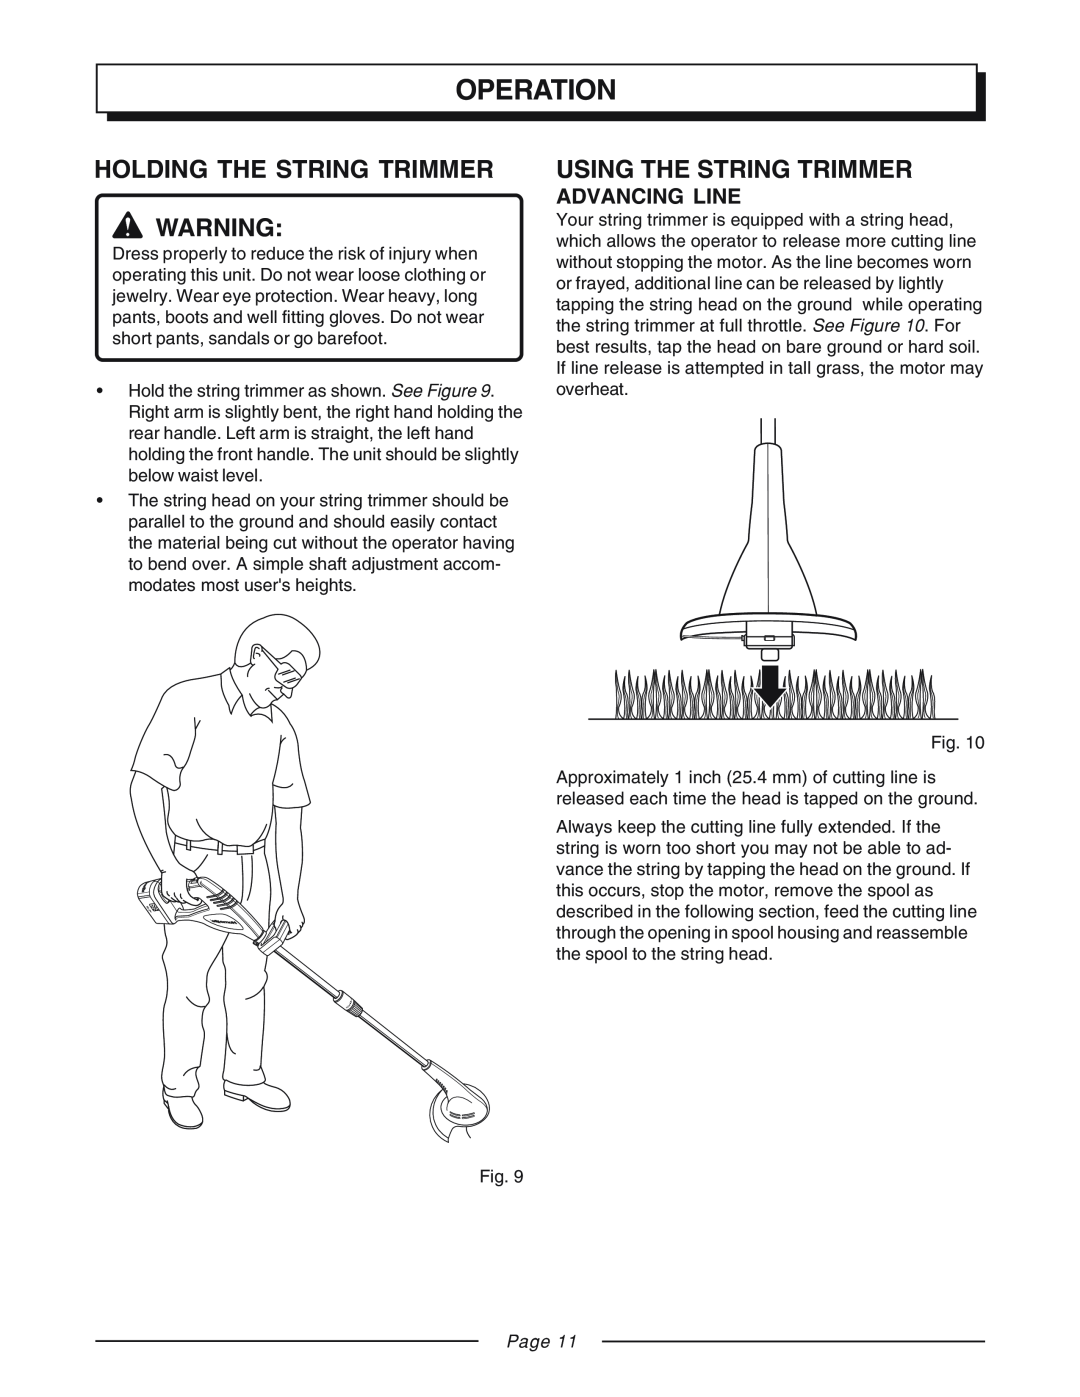 Homelite UT31810 manual Holding The String Trimmer, Using The String Trimmer, Advancing Line, Operation, Page 